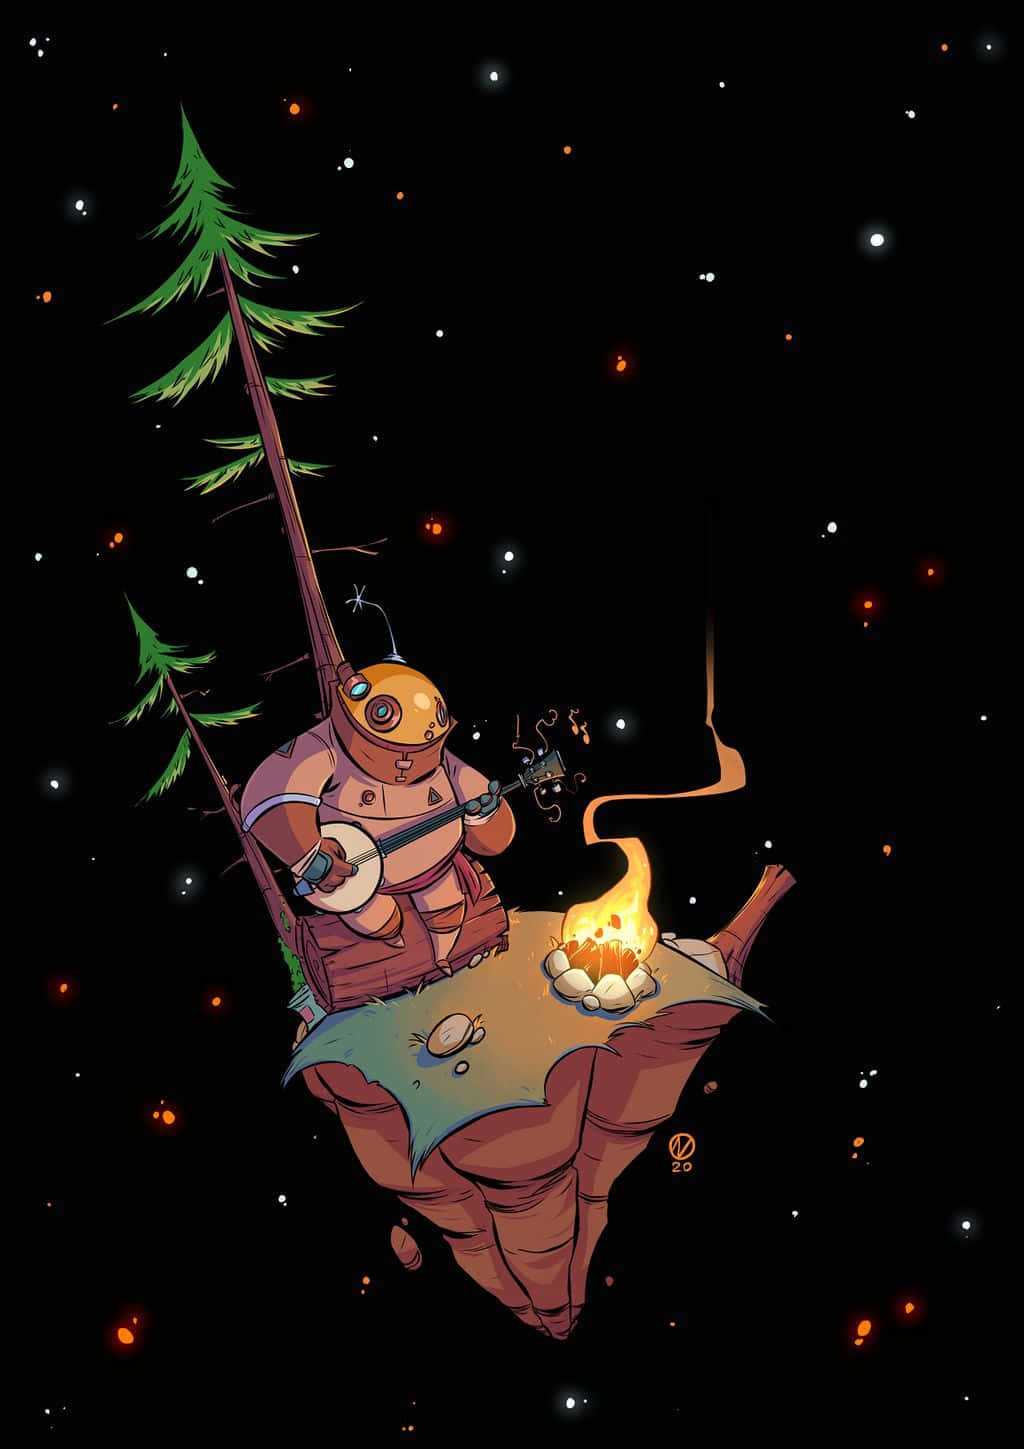 Outer Wilds - Wikipedia